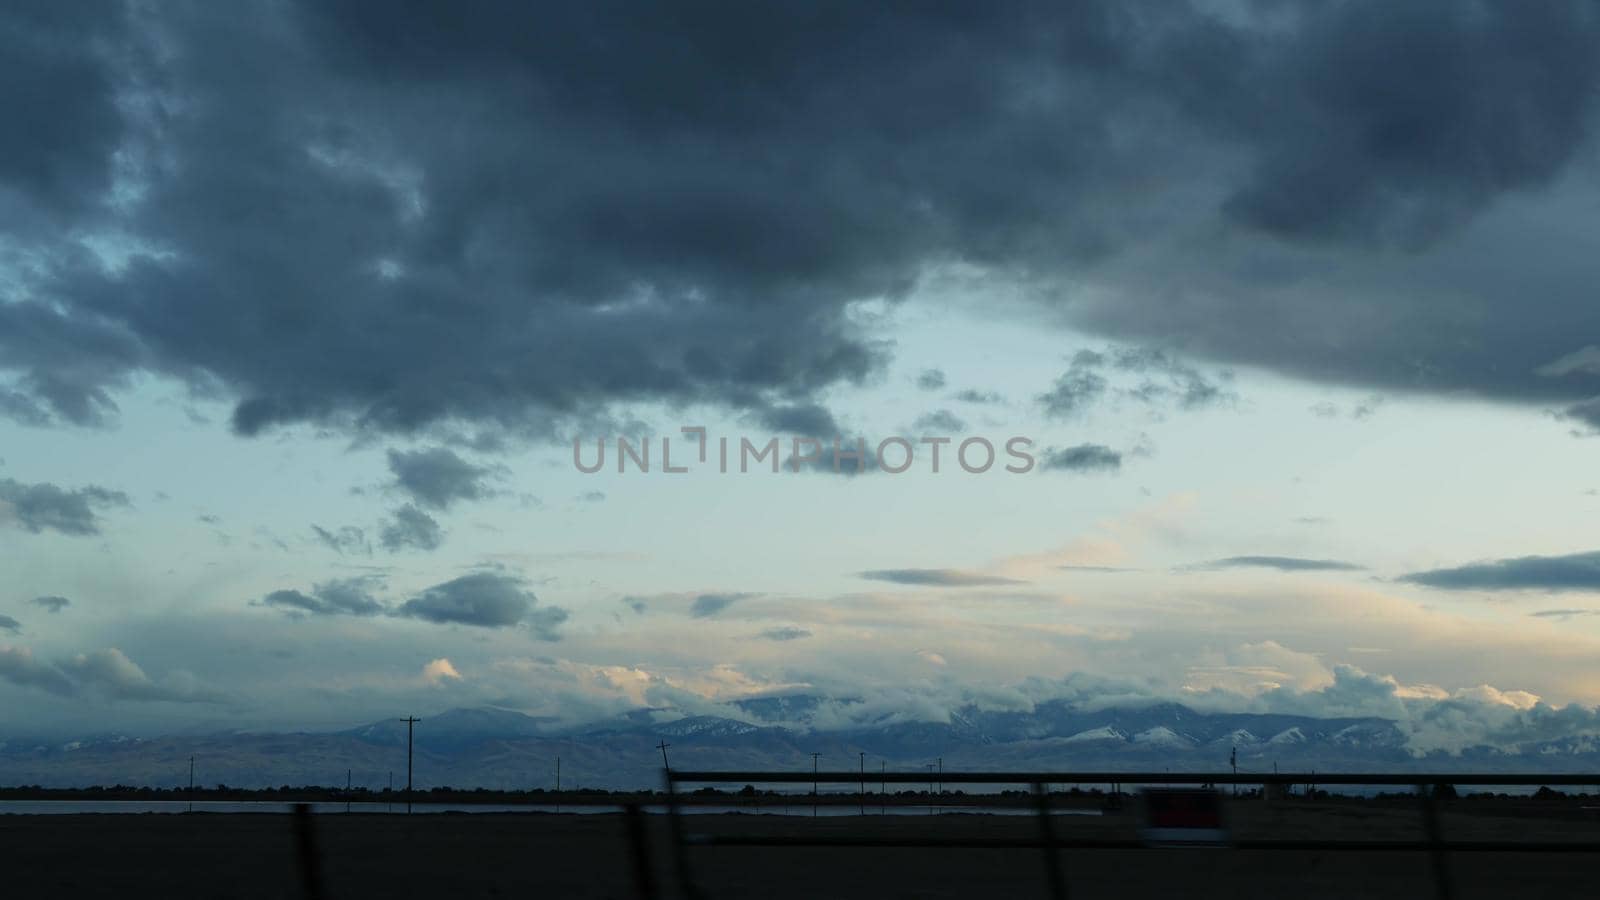 Driving auto, road trip in California, USA, view from car. Hitchhiking traveling in United States. Highway, mountains and cloudy dramatic sky before rain storm. American scenic byway. Passenger POV by DogoraSun